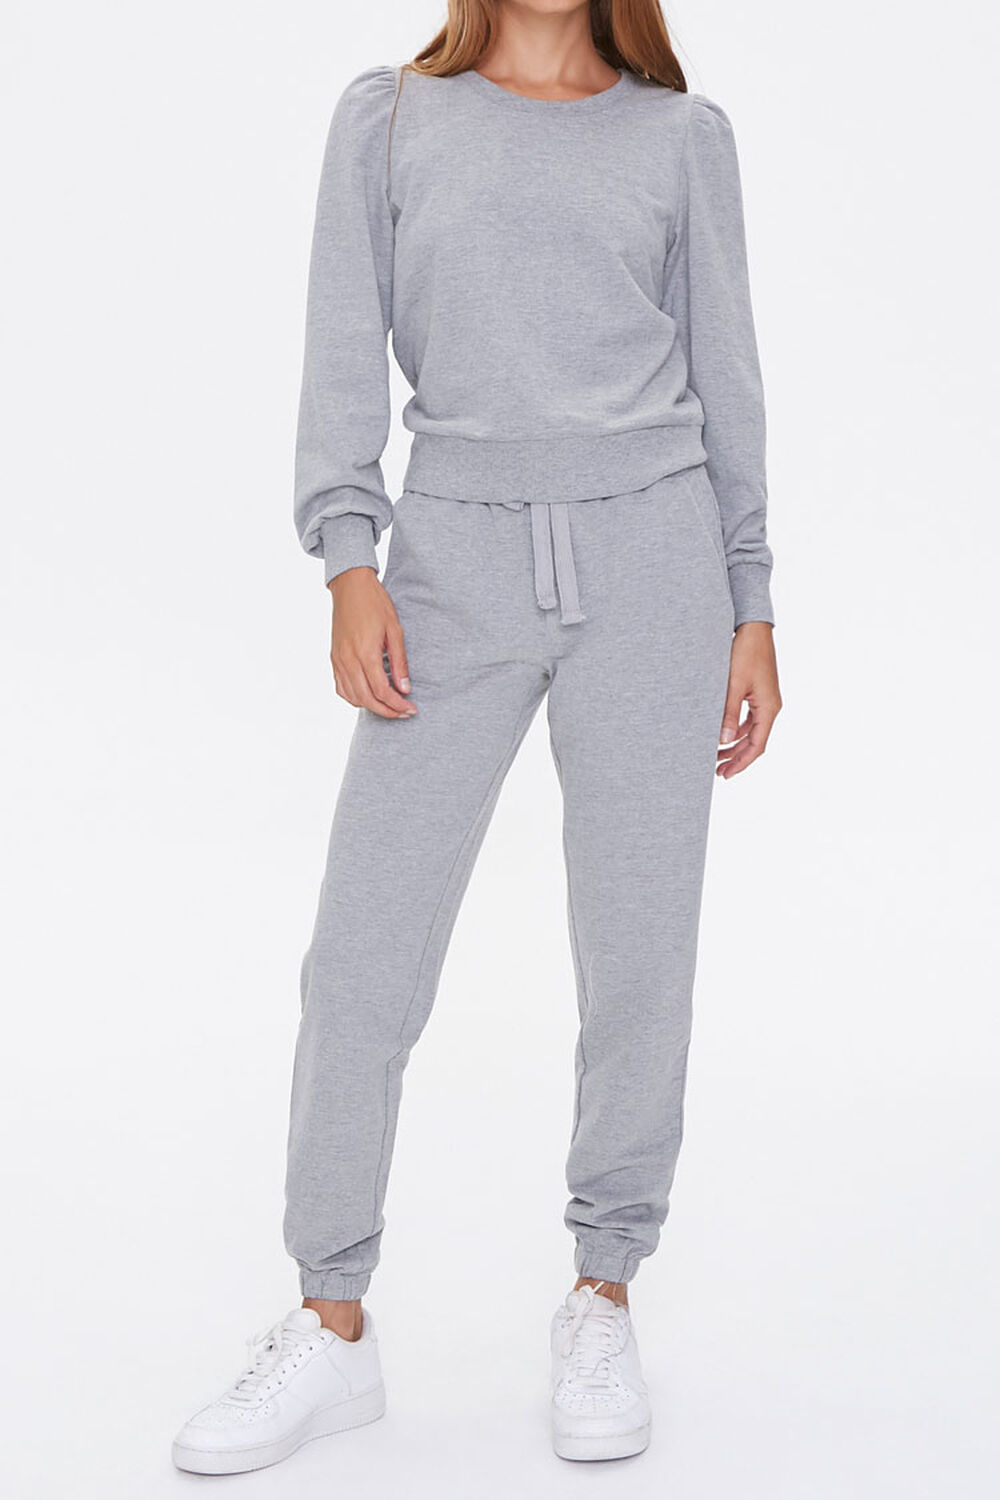 French Terry Top & Joggers Set, image 1